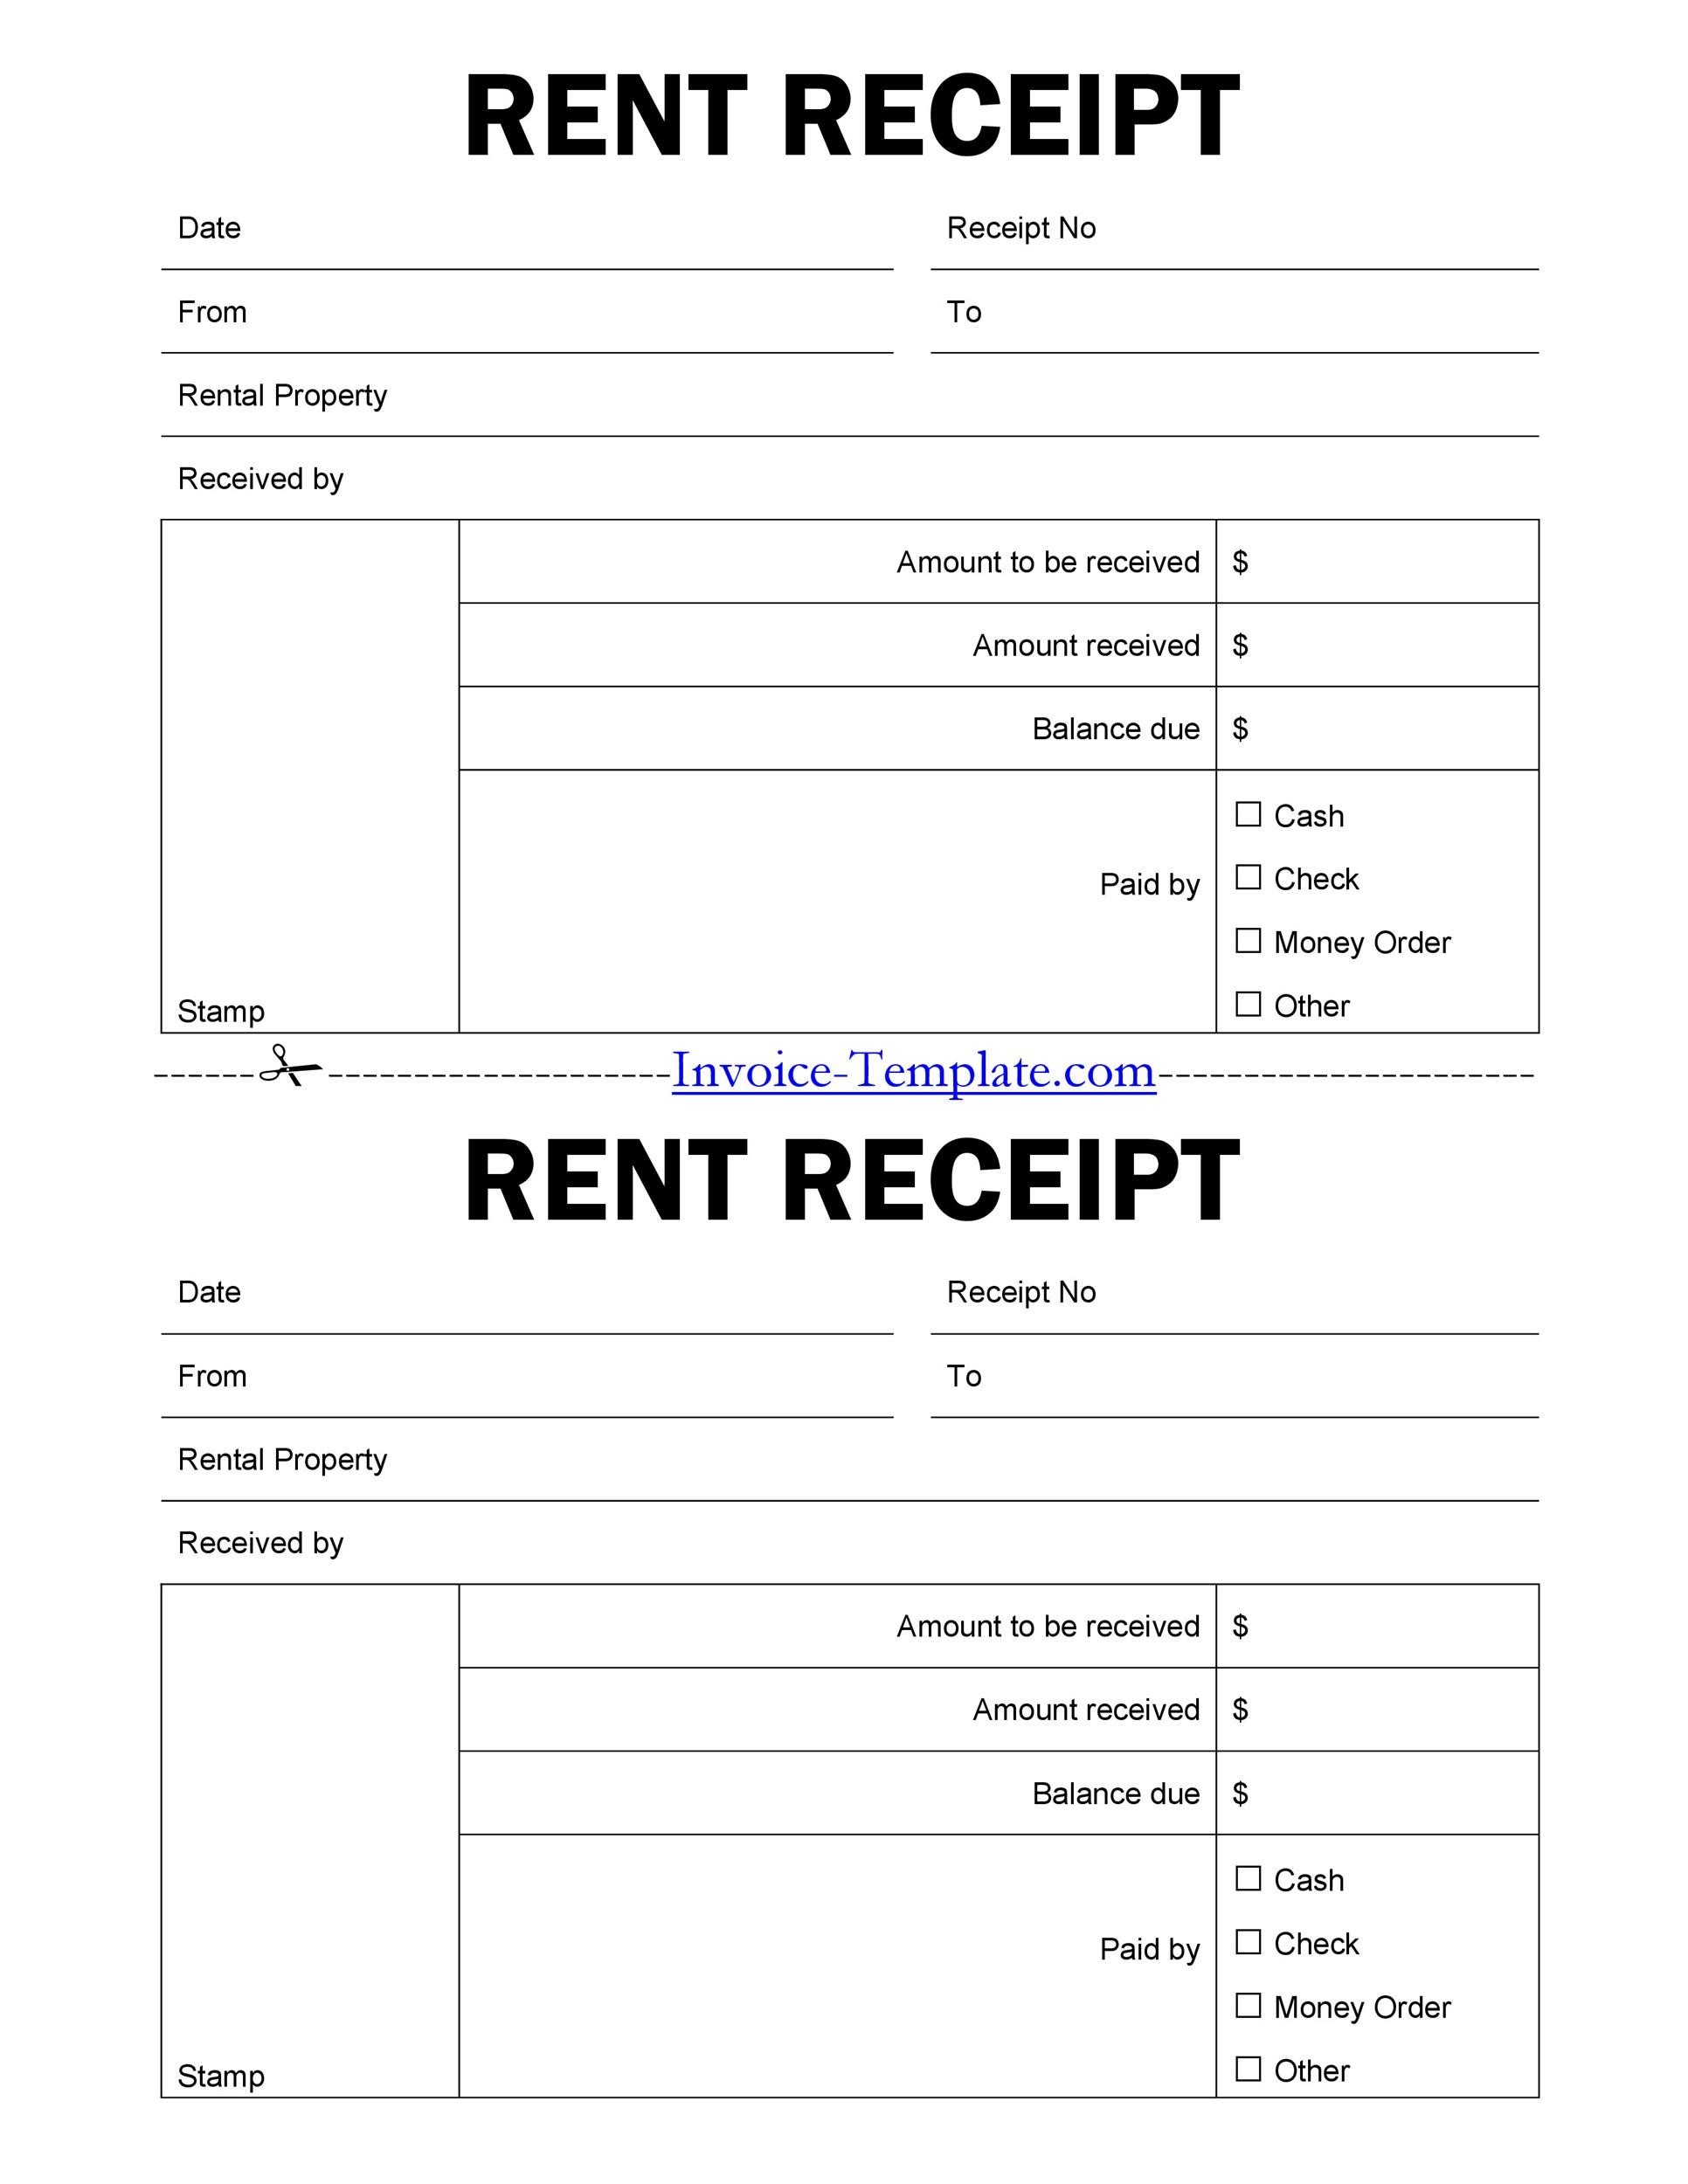 rent-receipt-template-excel-collection